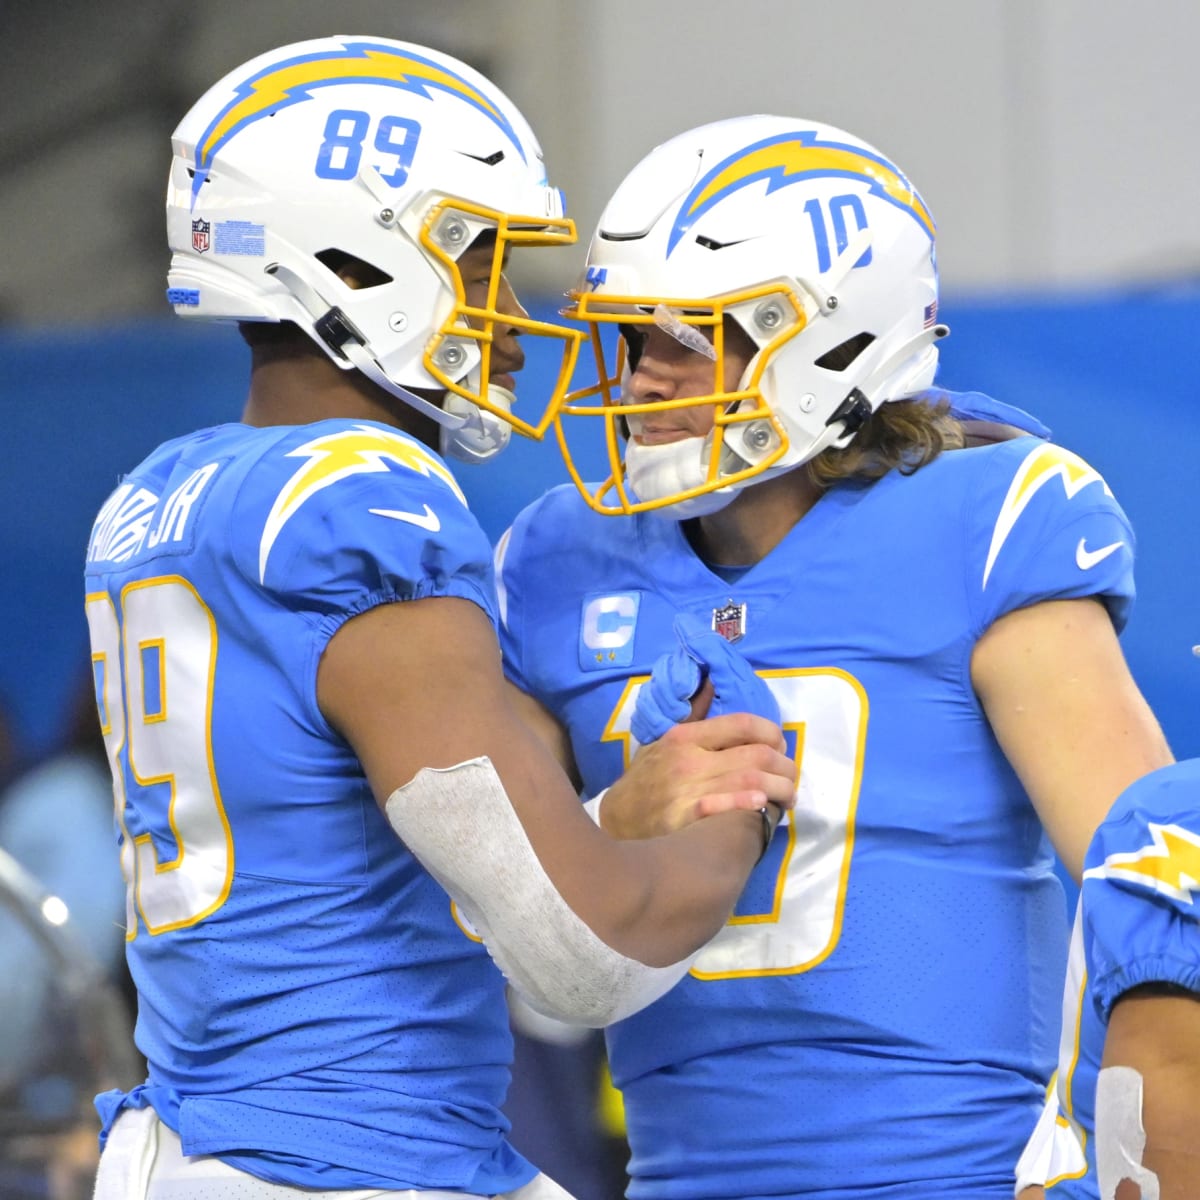 1 reason to be excited about each of Los Angeles Chargers' draft picks